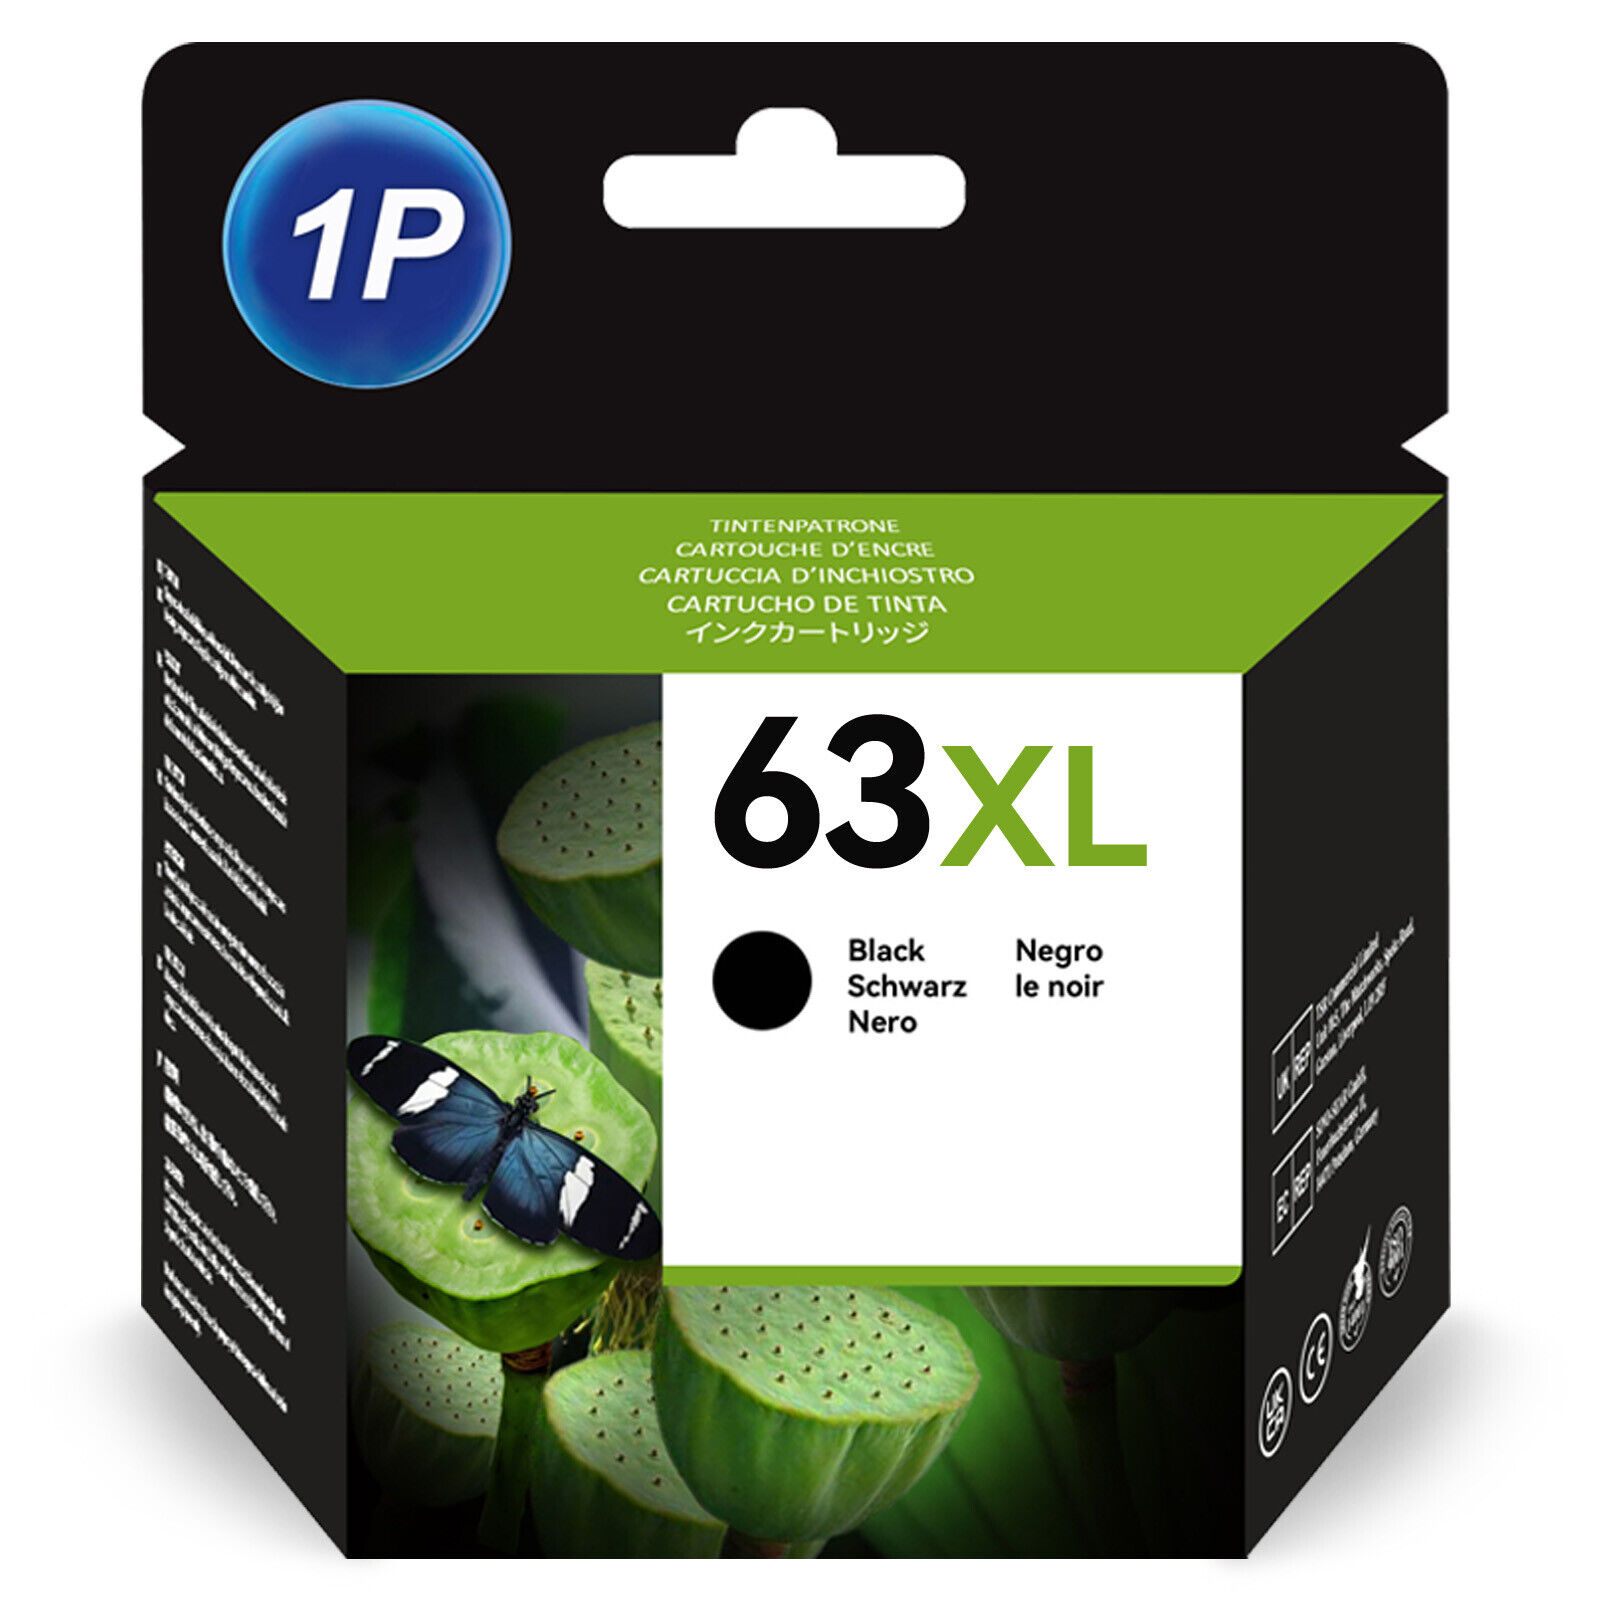 63XL Ink Cartridge Compatible for HP OfficeJet 3830 4650 Envy 4520 4522 4510 Lot